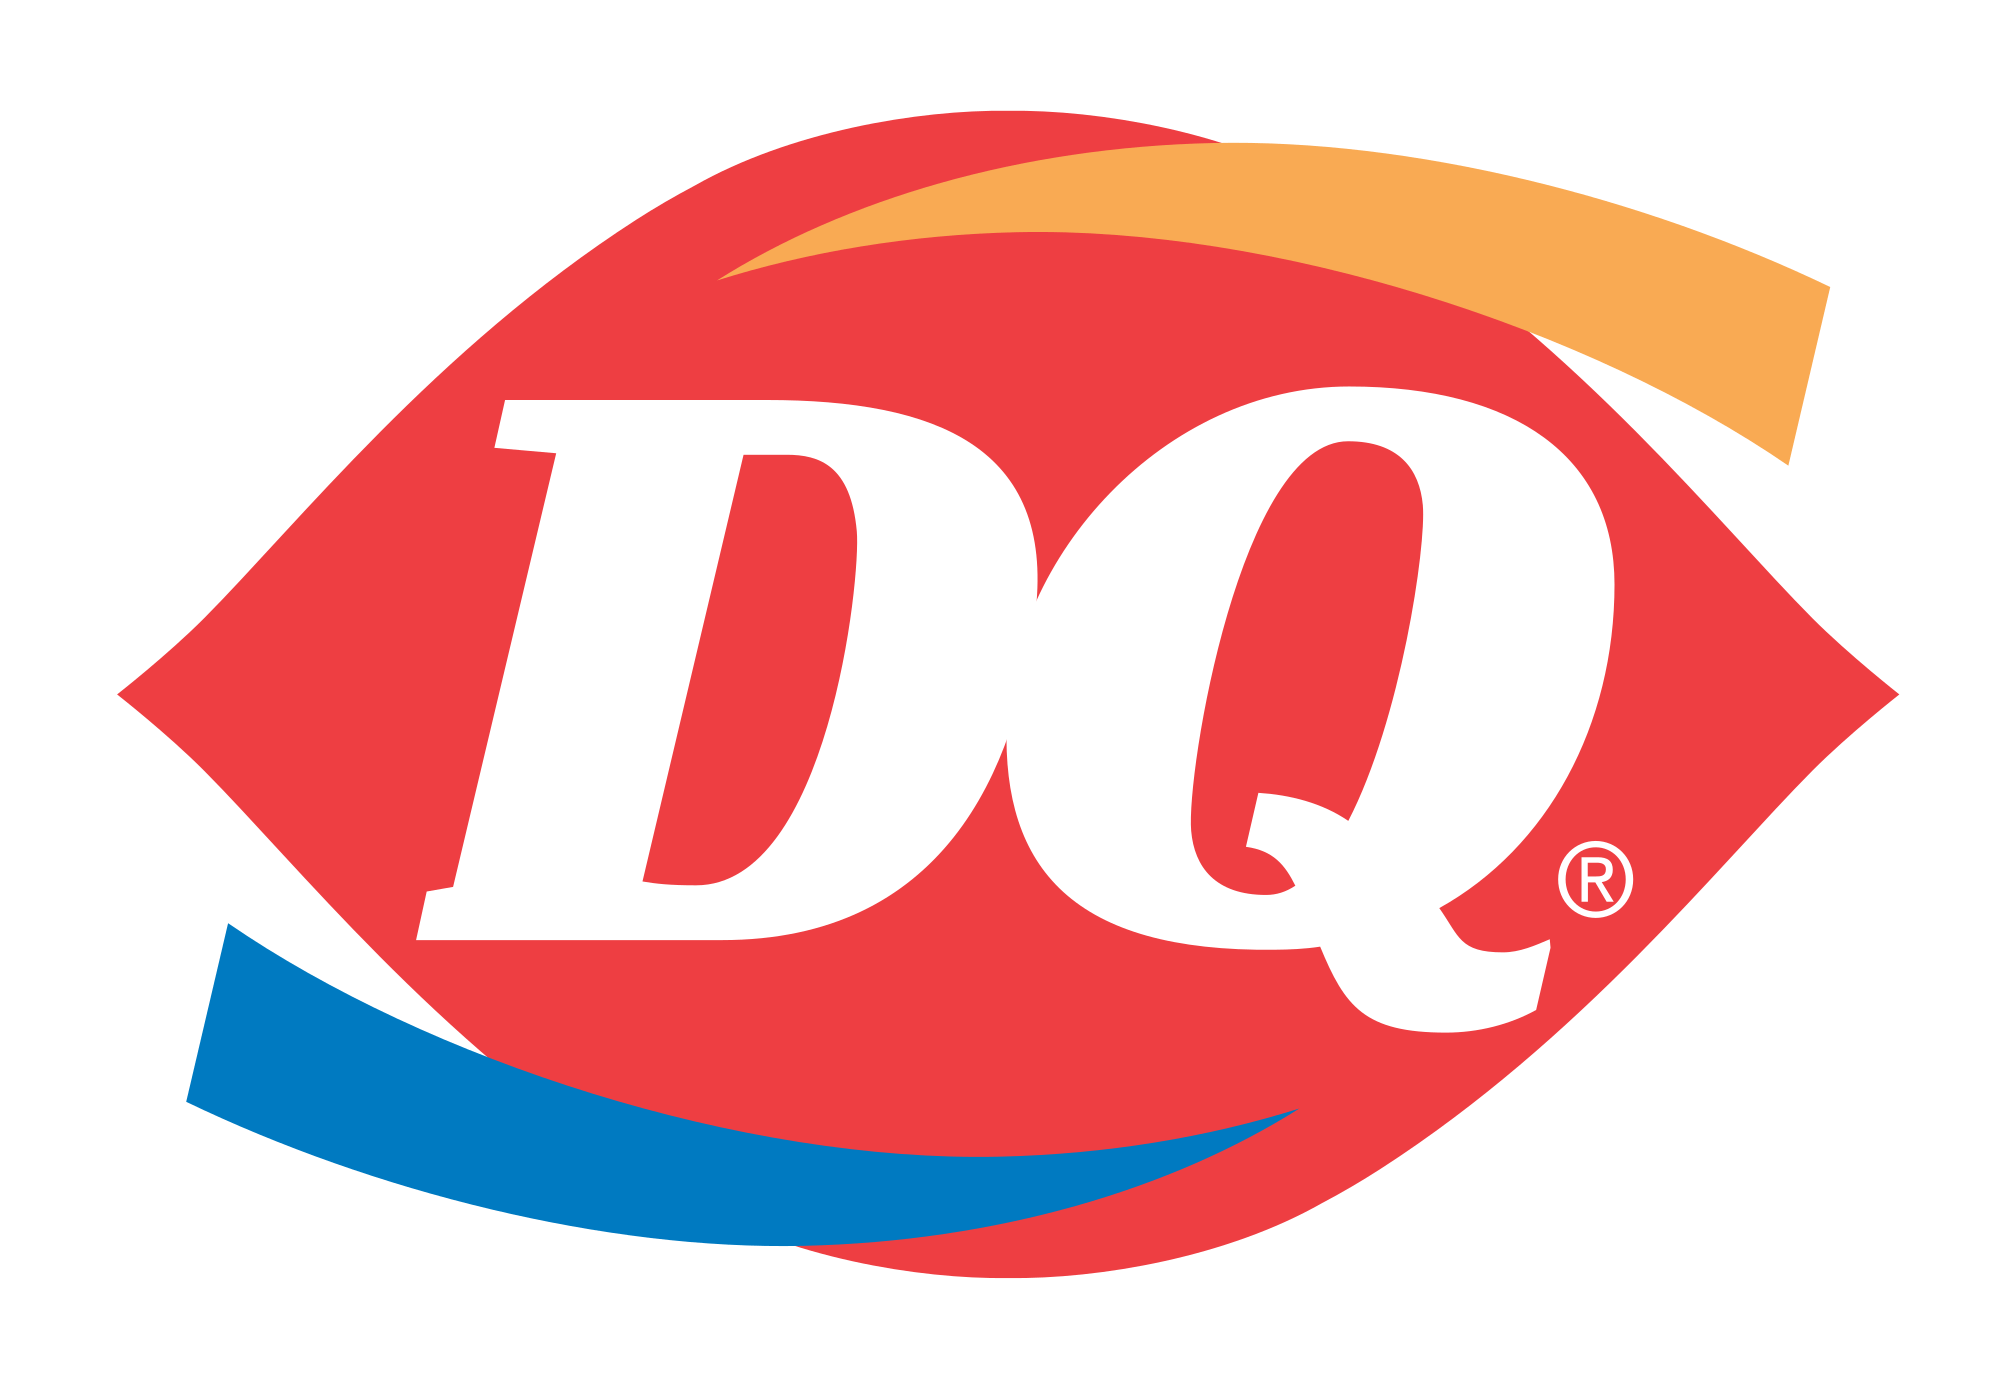 That's What's Large Two M Logo - Dairy Queen